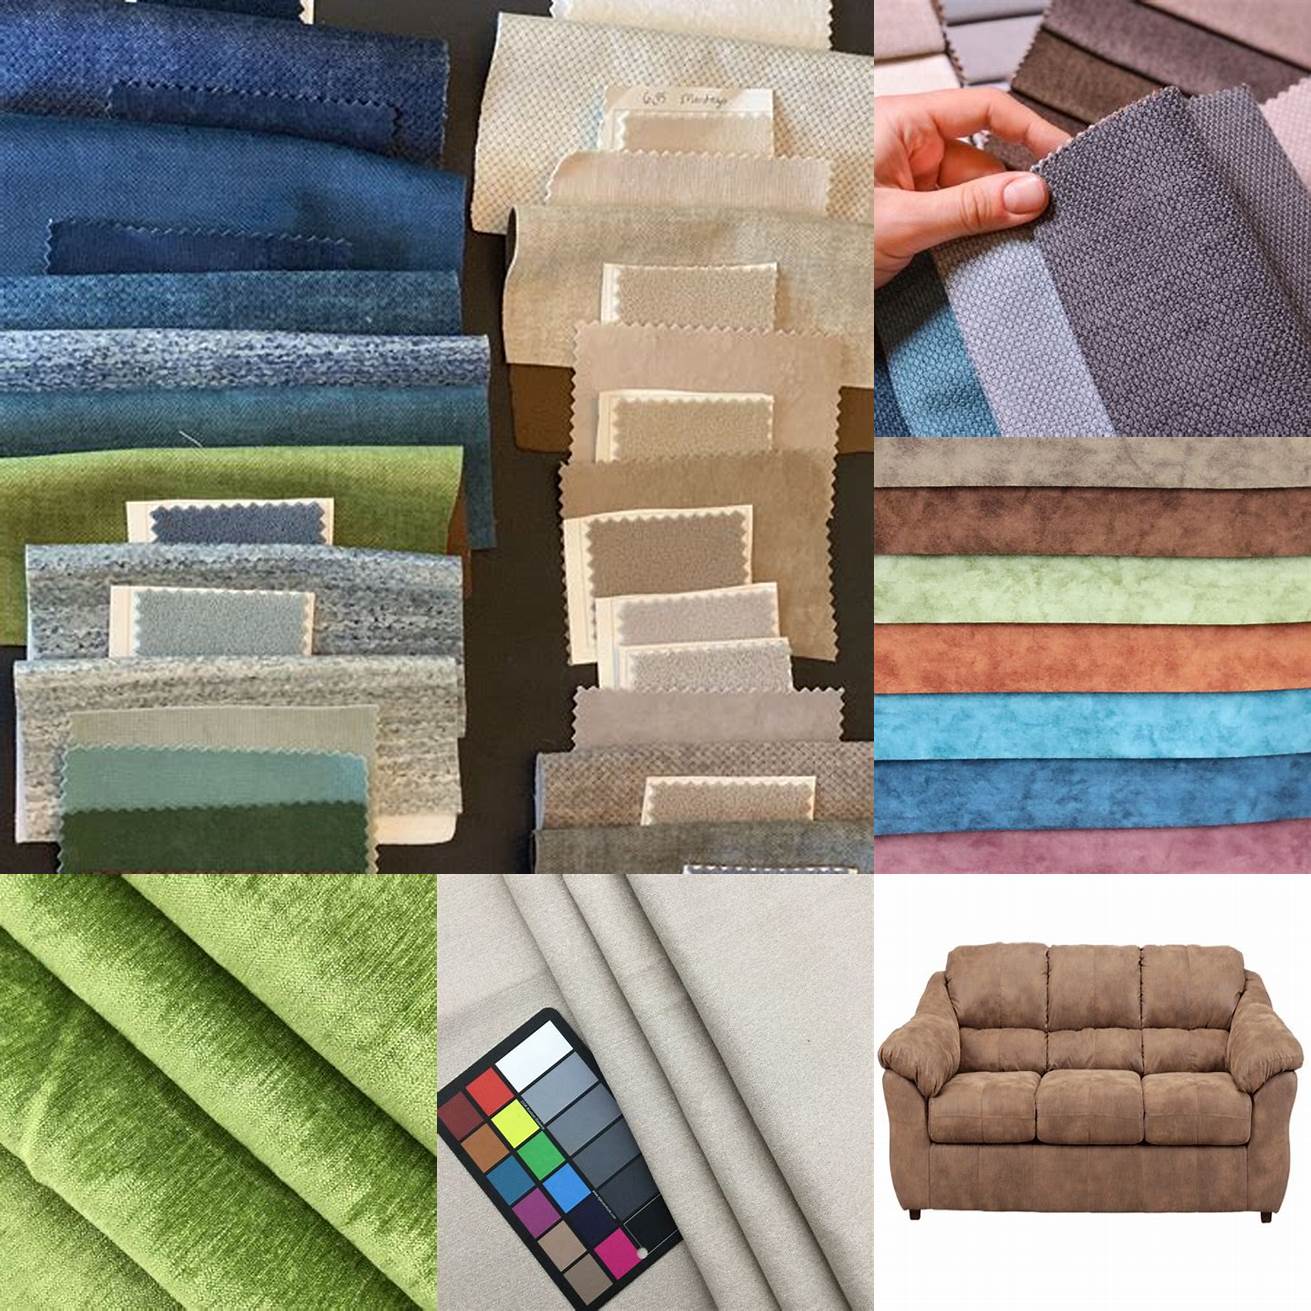 Microfiber - Microfiber upholstery is soft and durable and comes in a wide range of colors and patterns